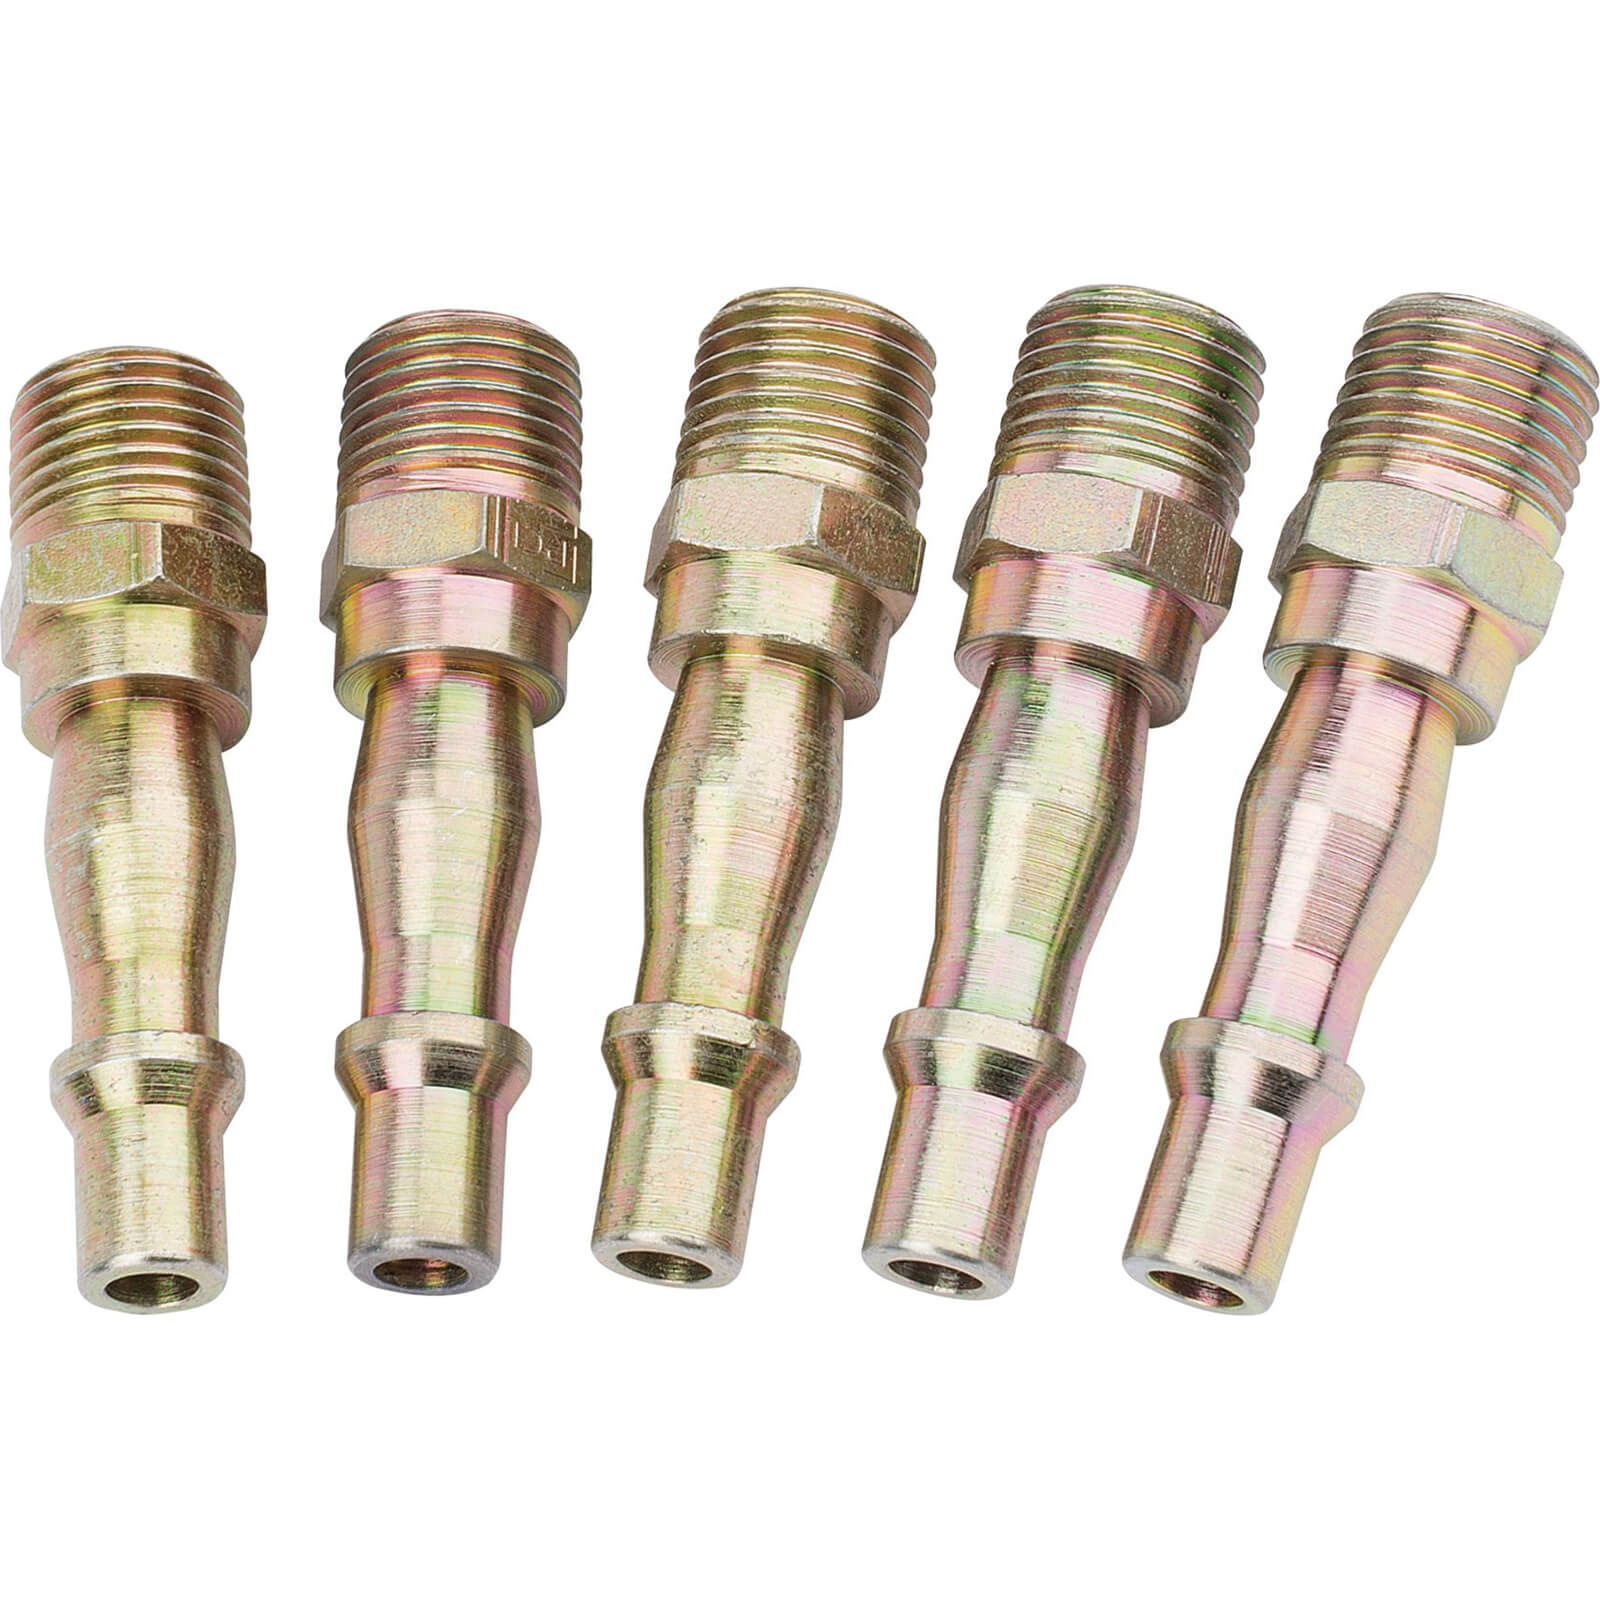 Image of Draper PCL Air Line Adaptor Male Thread 1/4" BSP Pack of 5